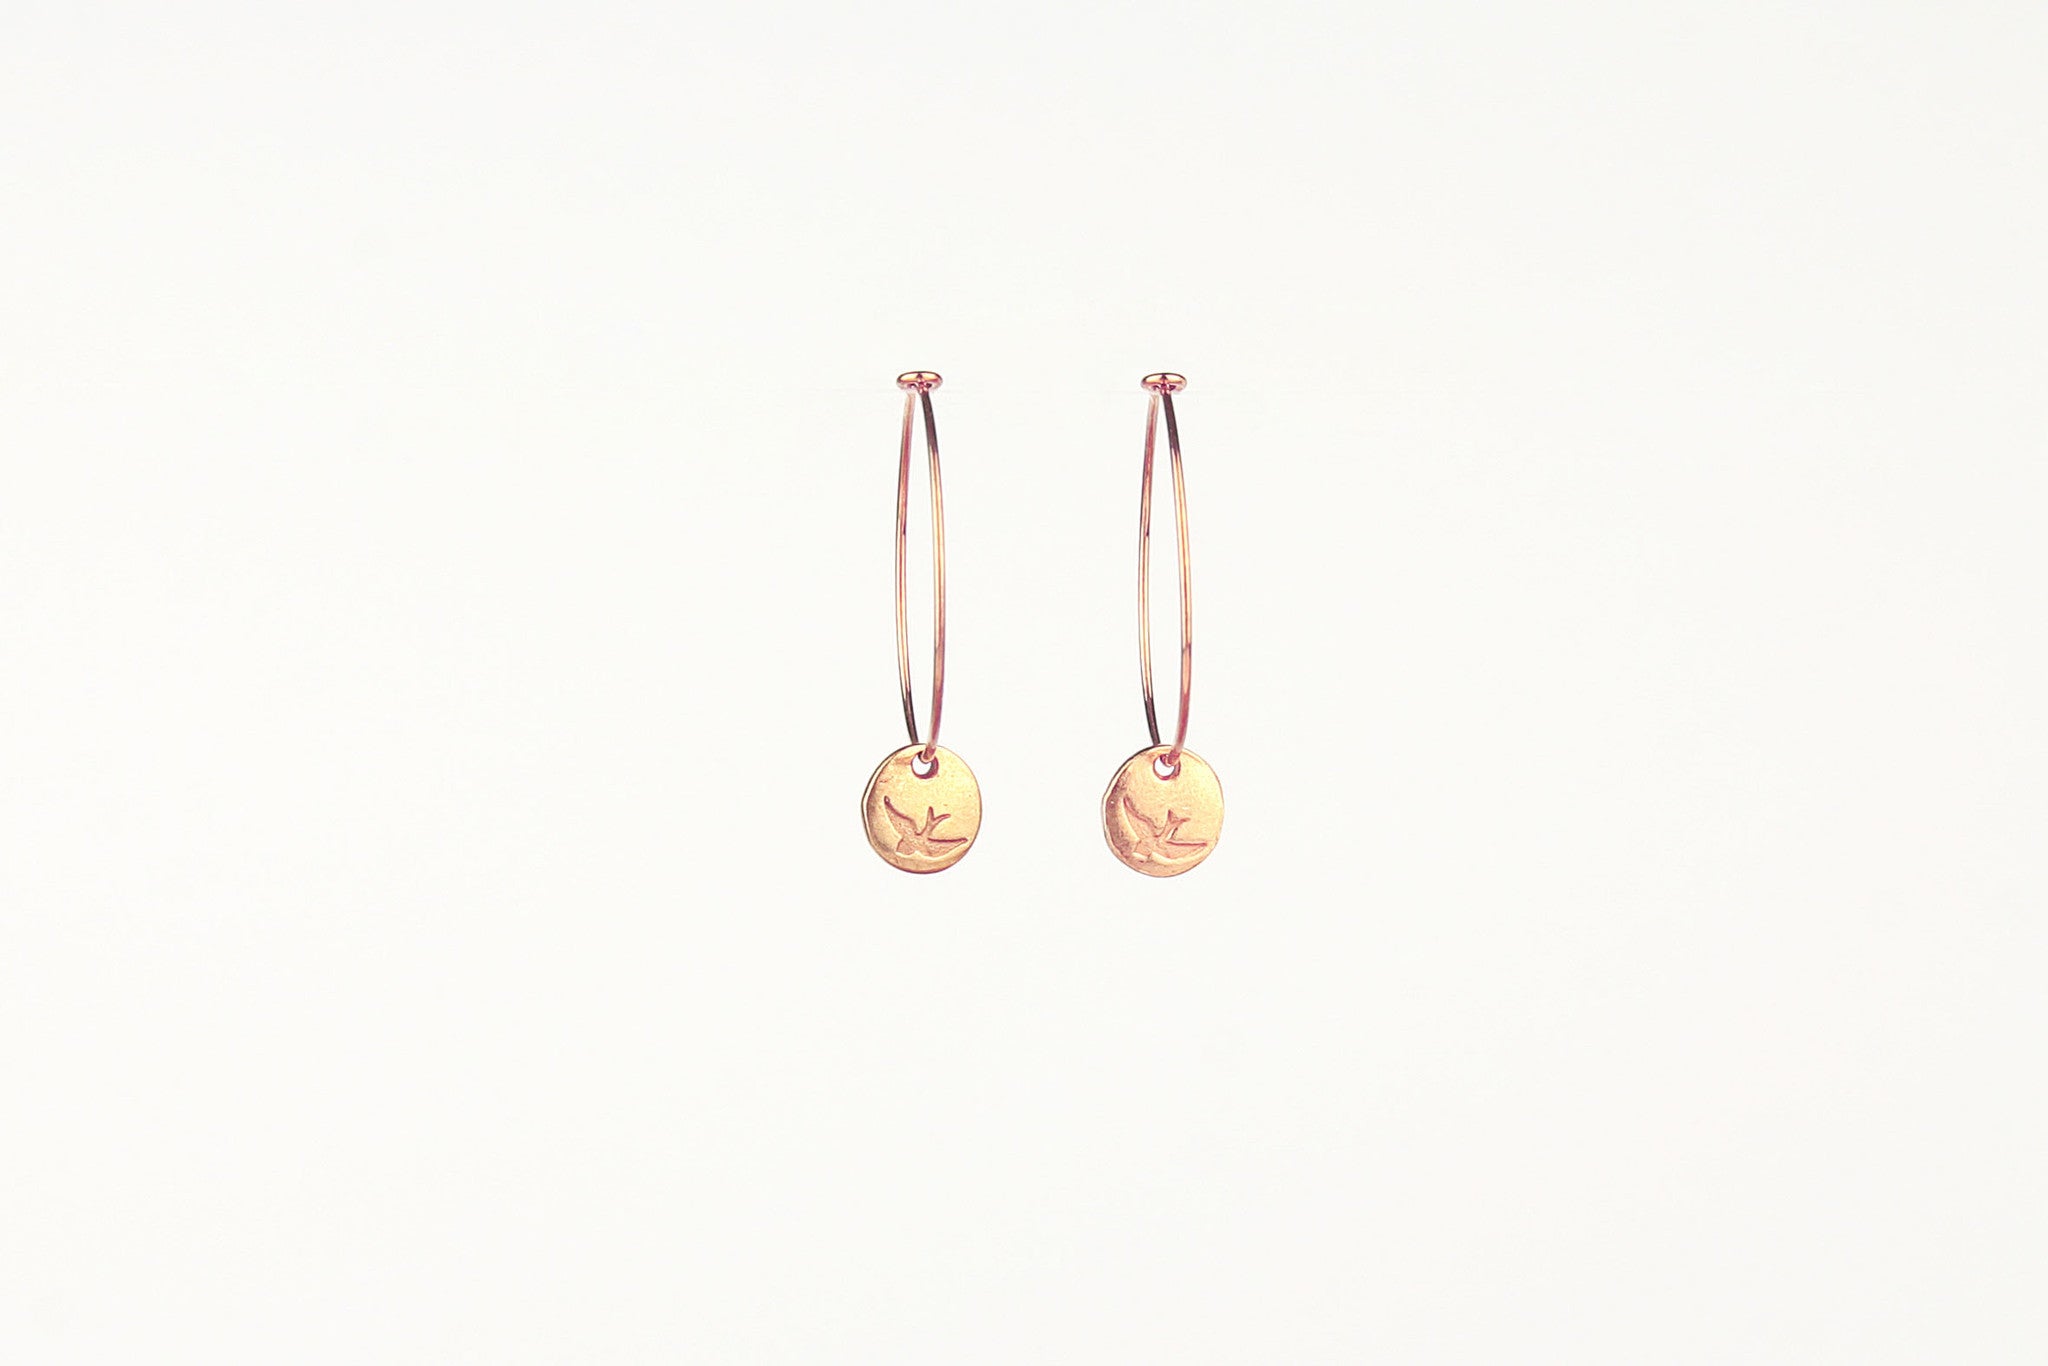 jewelberry ohrringe earrings bird token hoops rose gold plated sterling silver fine jewelry handmade with love fairtrade